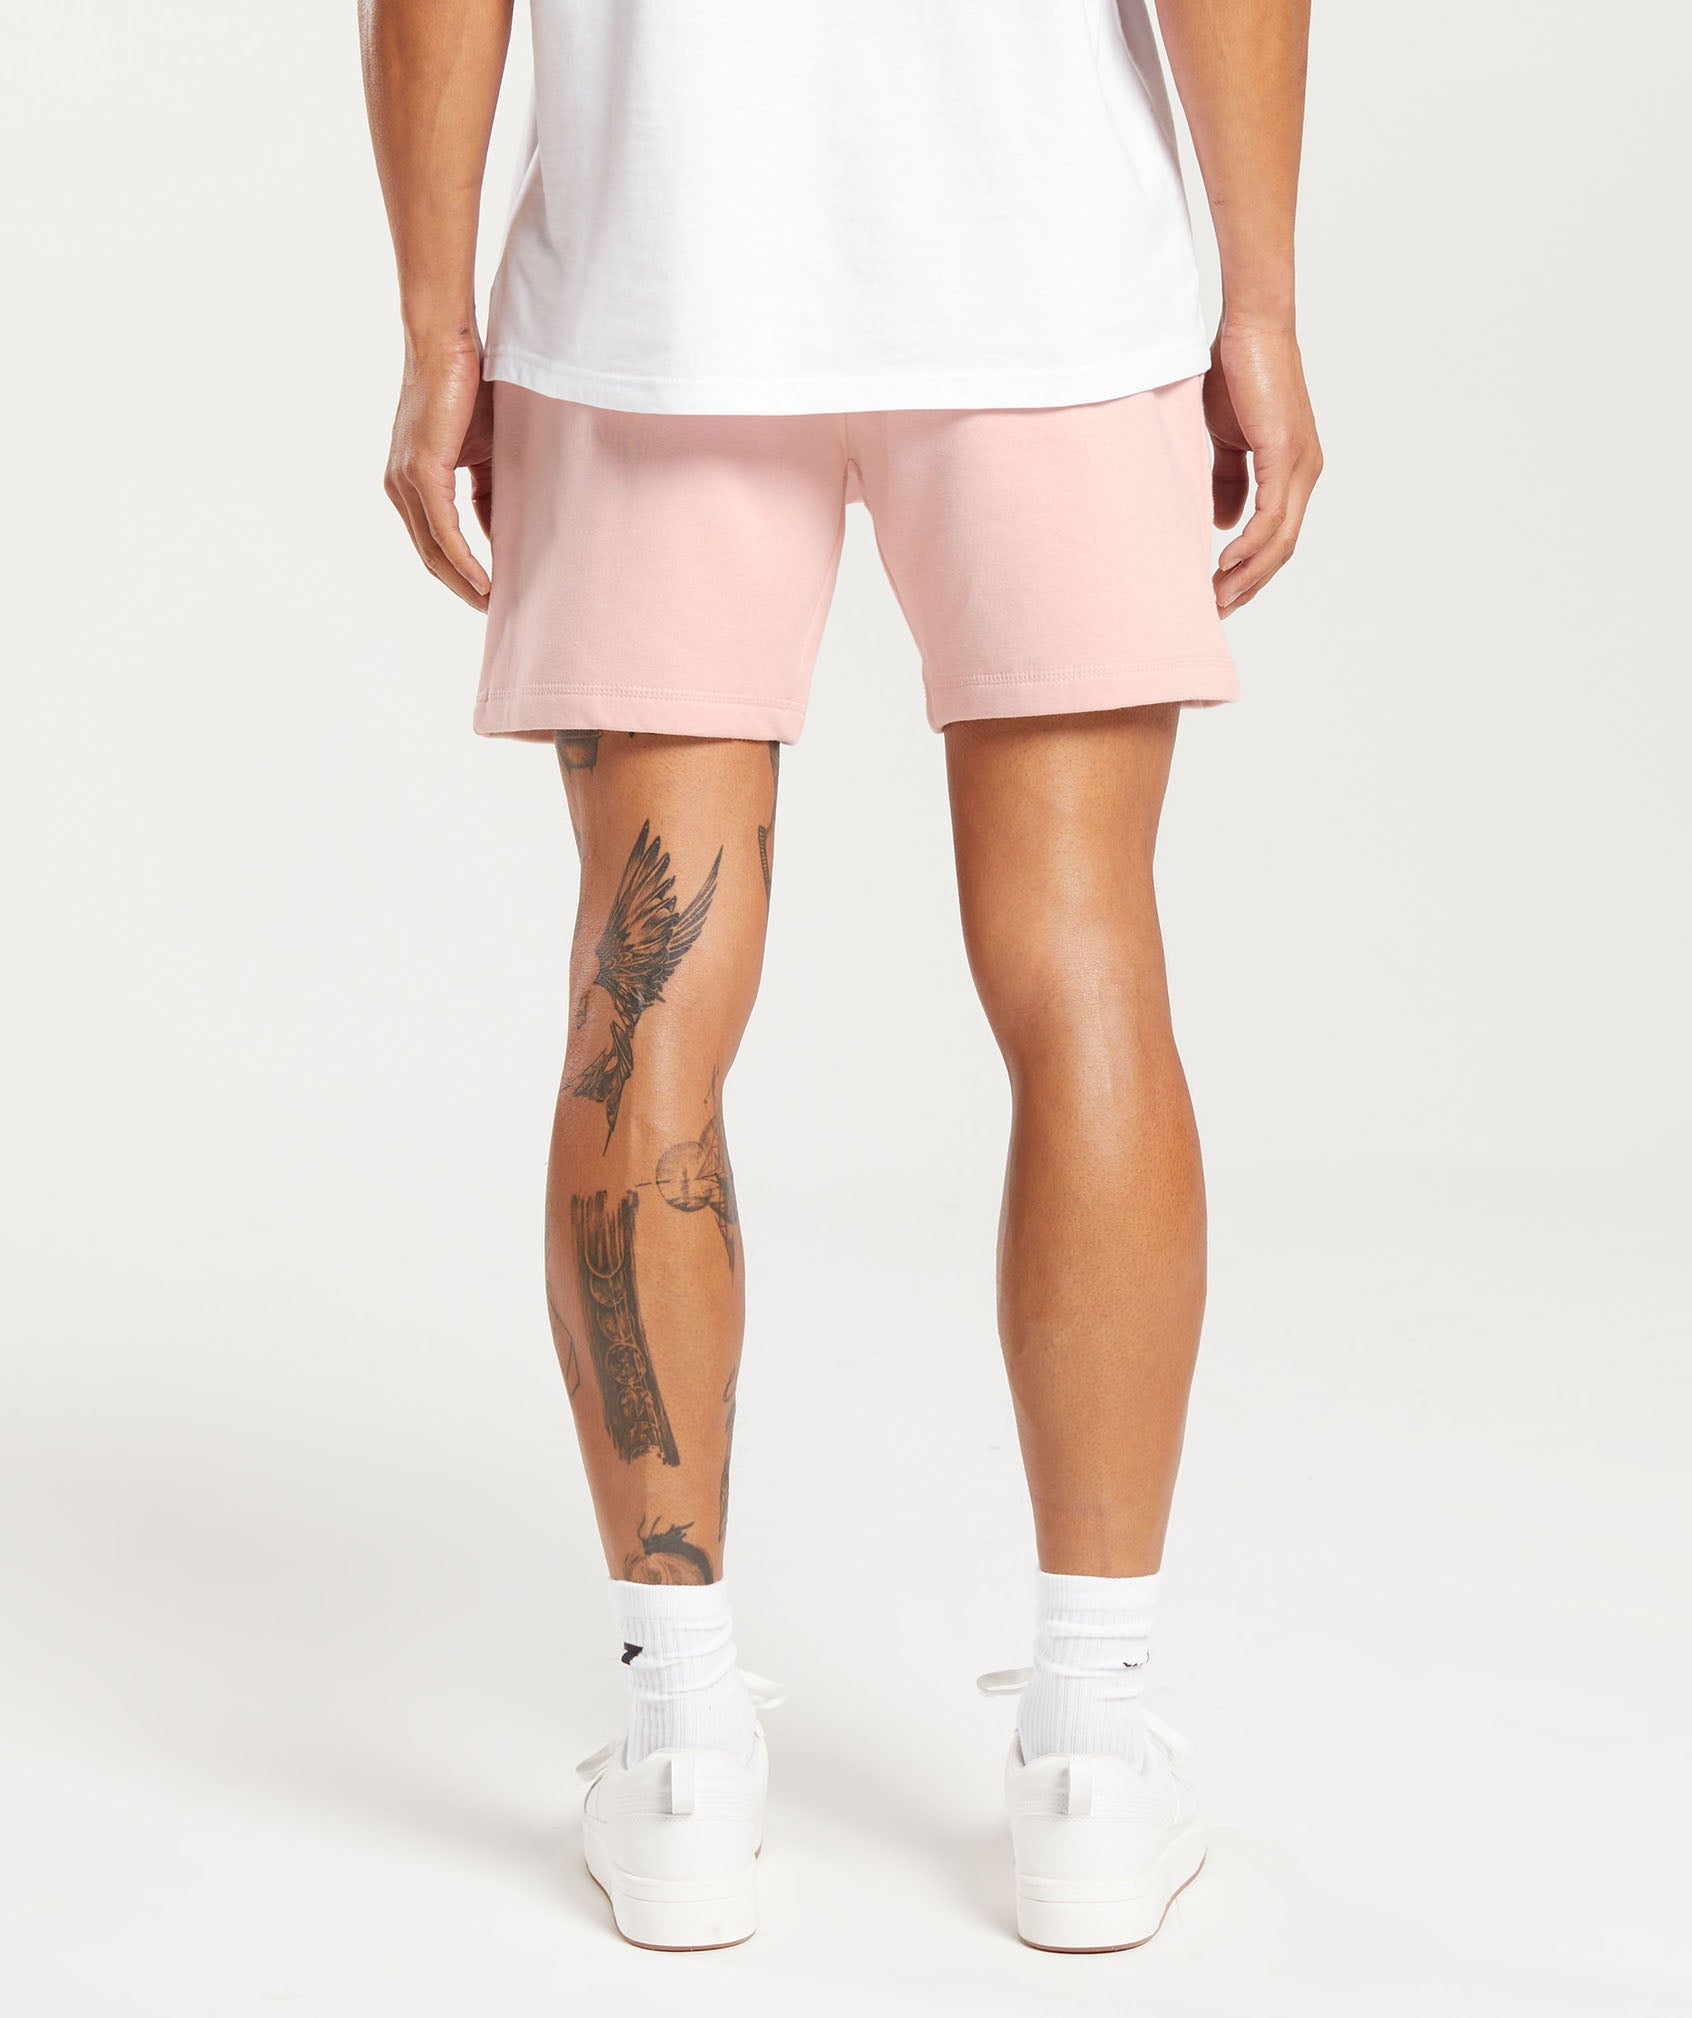 Crest Shorts in Misty Pink